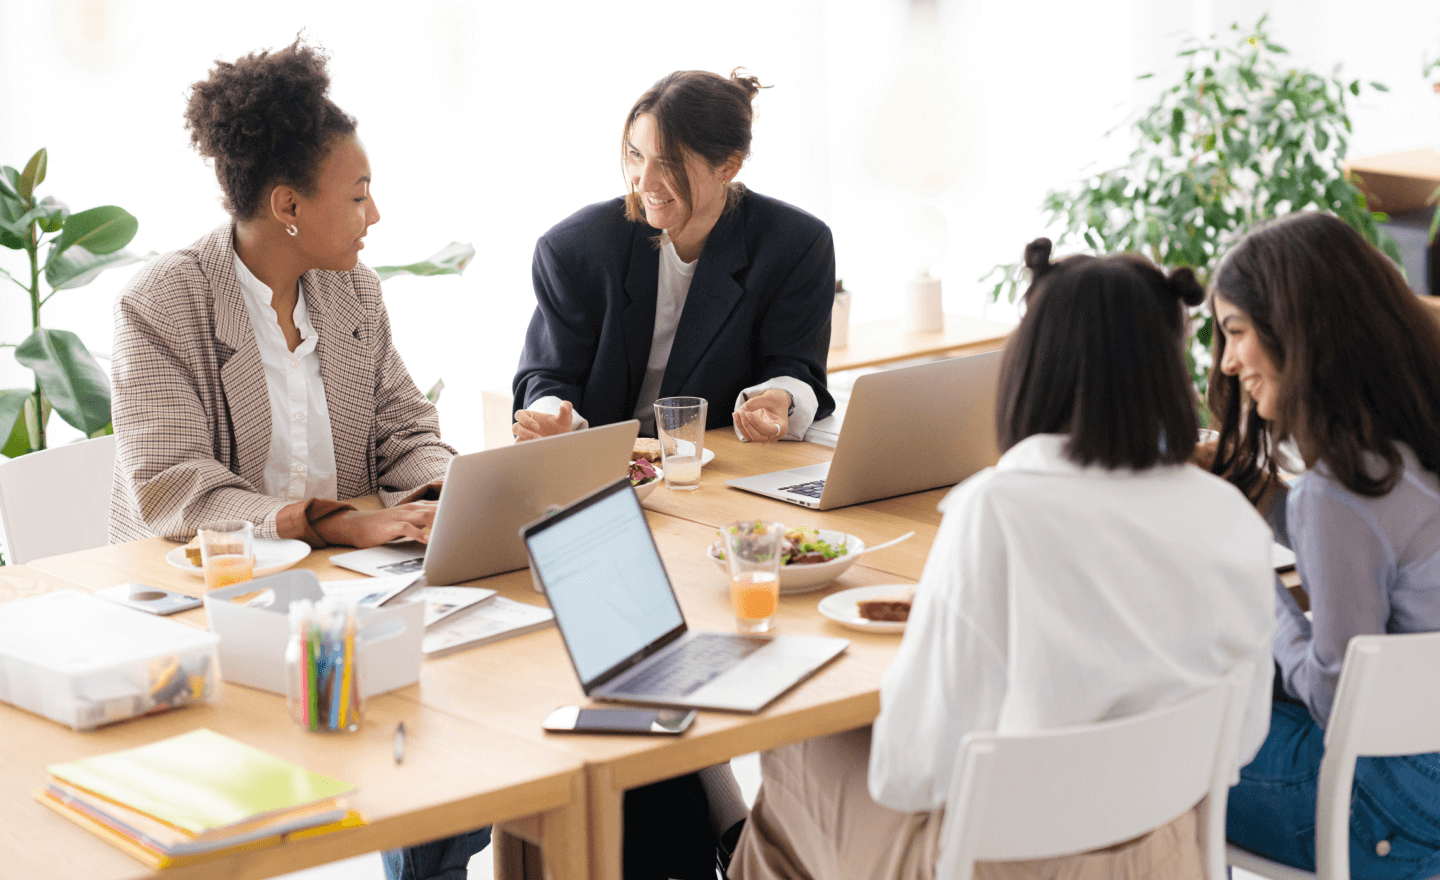 Image of happy women working together at a table with laptops